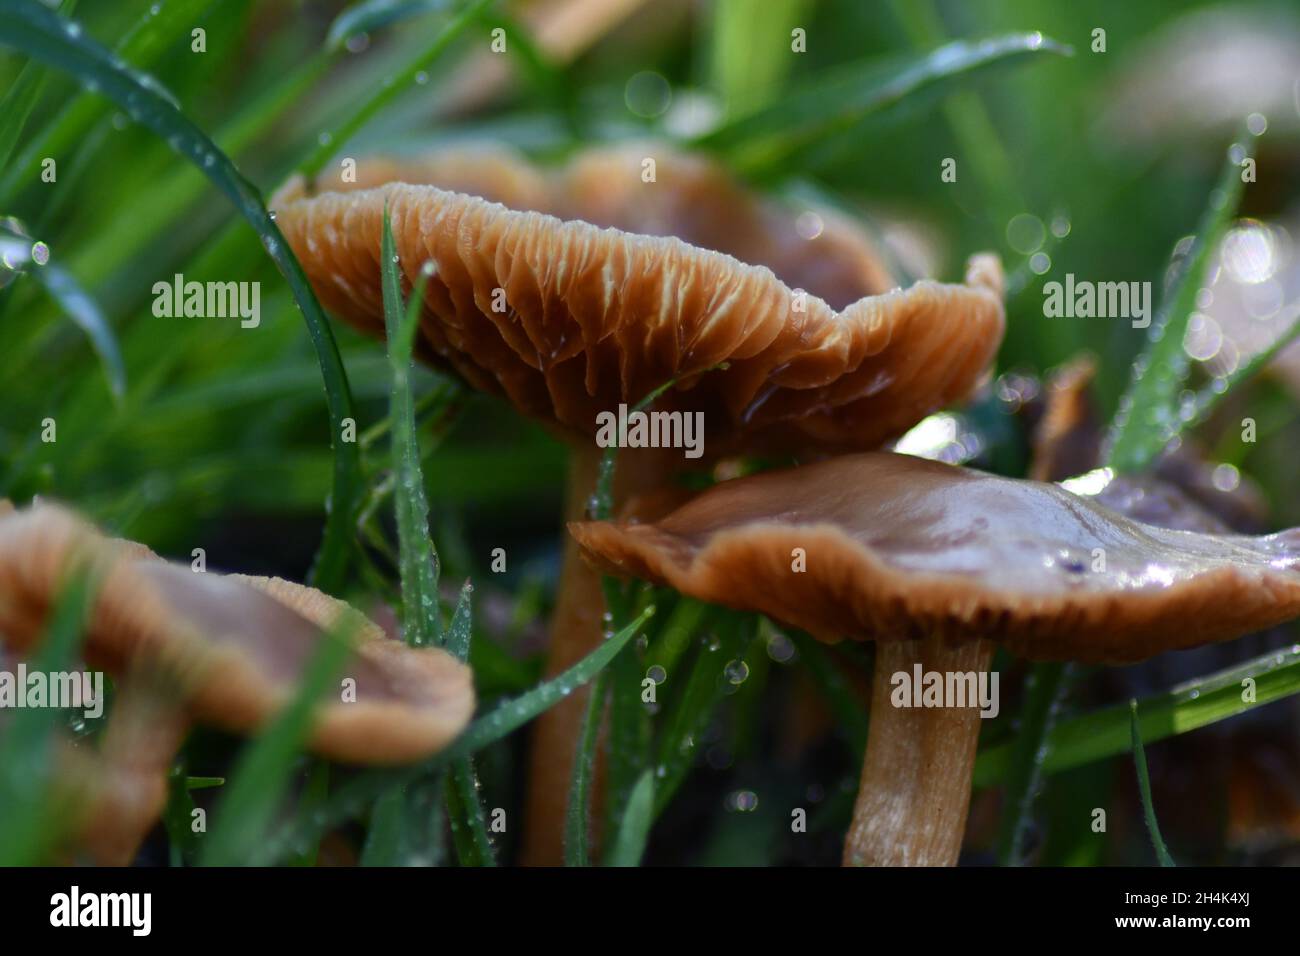 Wild Mushrooms, Fungi in the undergrowth of an English Forest Stock Photo